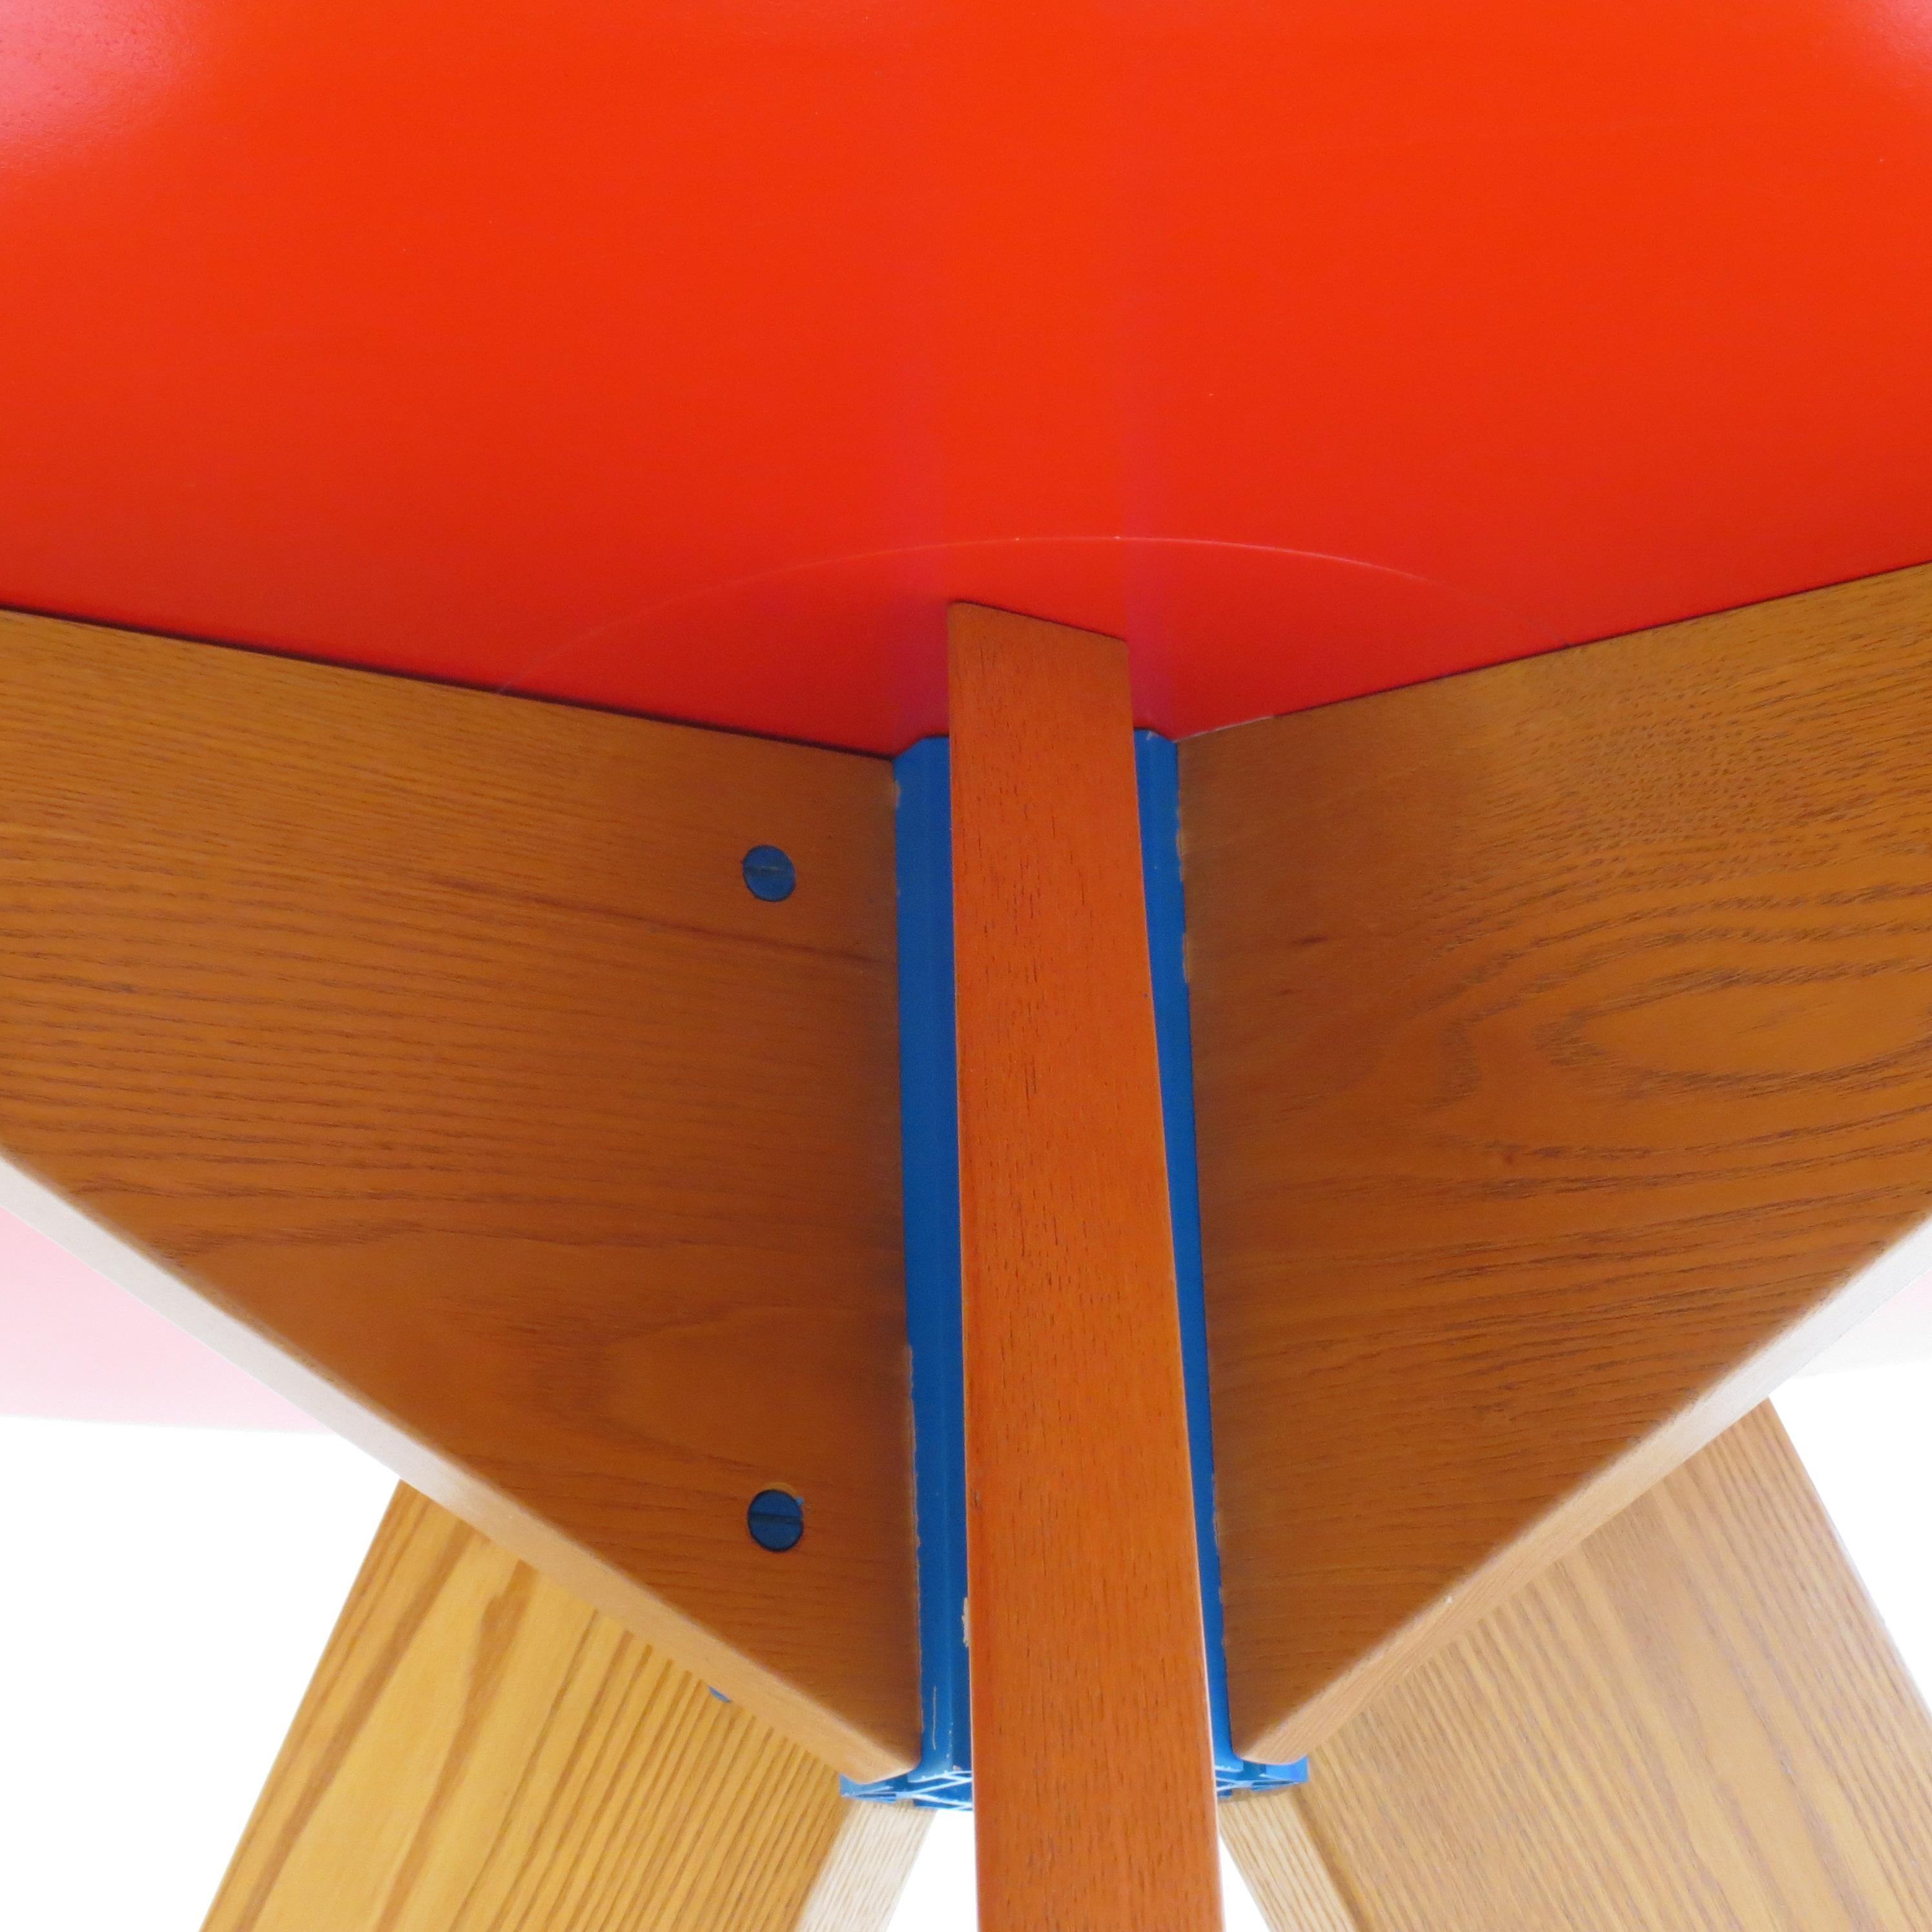 Hand-Crafted Midcentury Bespoke Round Dining Table by David Field 1980s with Red Blue Detail